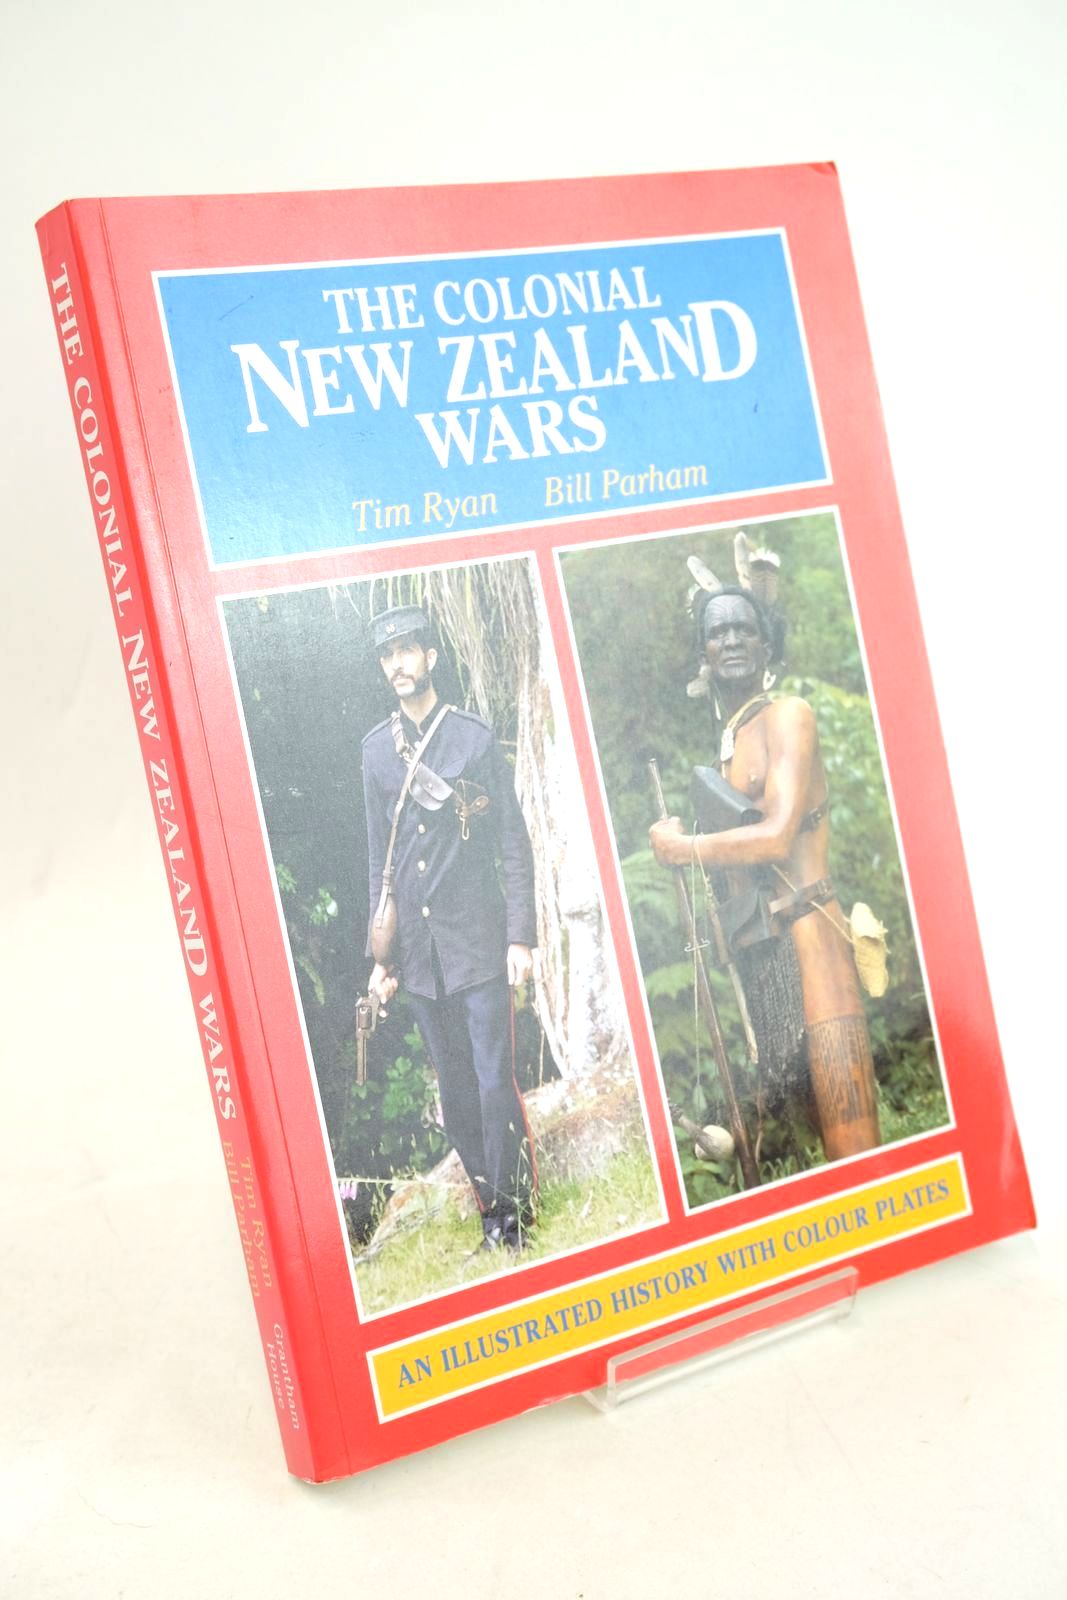 Photo of THE COLONIAL NEW ZEALAND WARS written by Ryan, Tim Parham, Bill published by Grantham House (STOCK CODE: 1327477)  for sale by Stella & Rose's Books